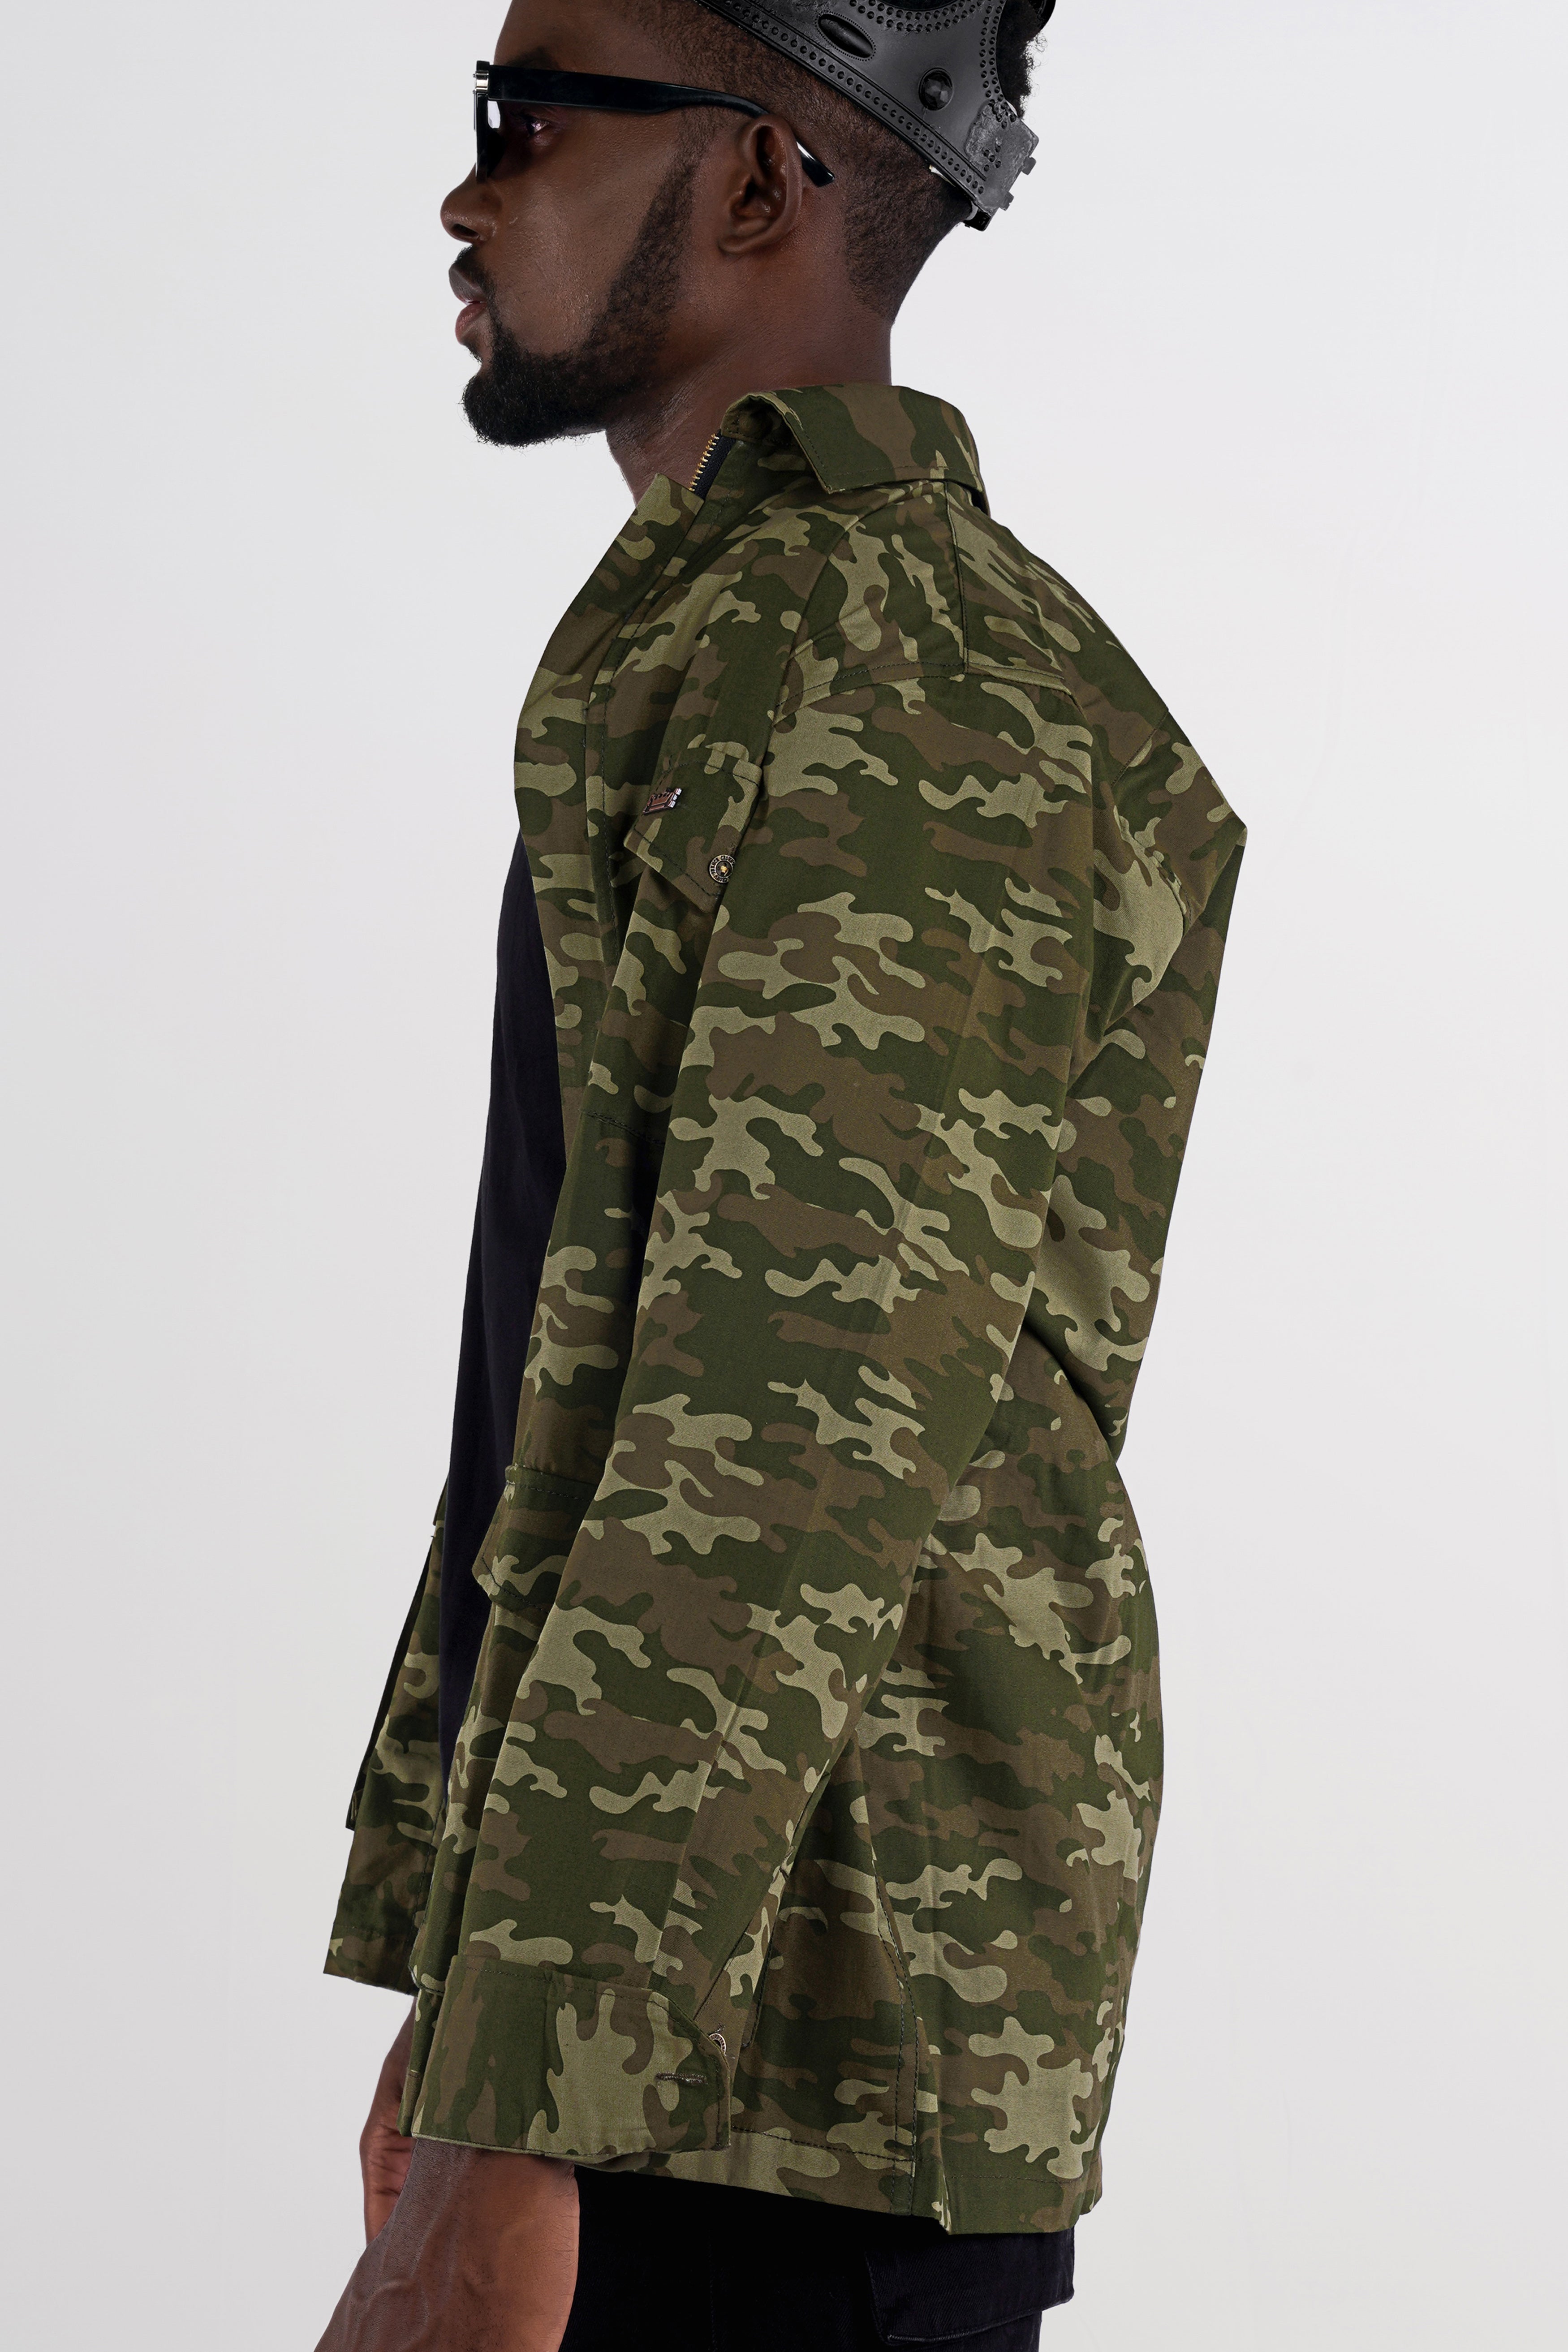 Bistre Green with Fuscous Brown Camouflage Printed Royal Oxford Designer zipper Jacket